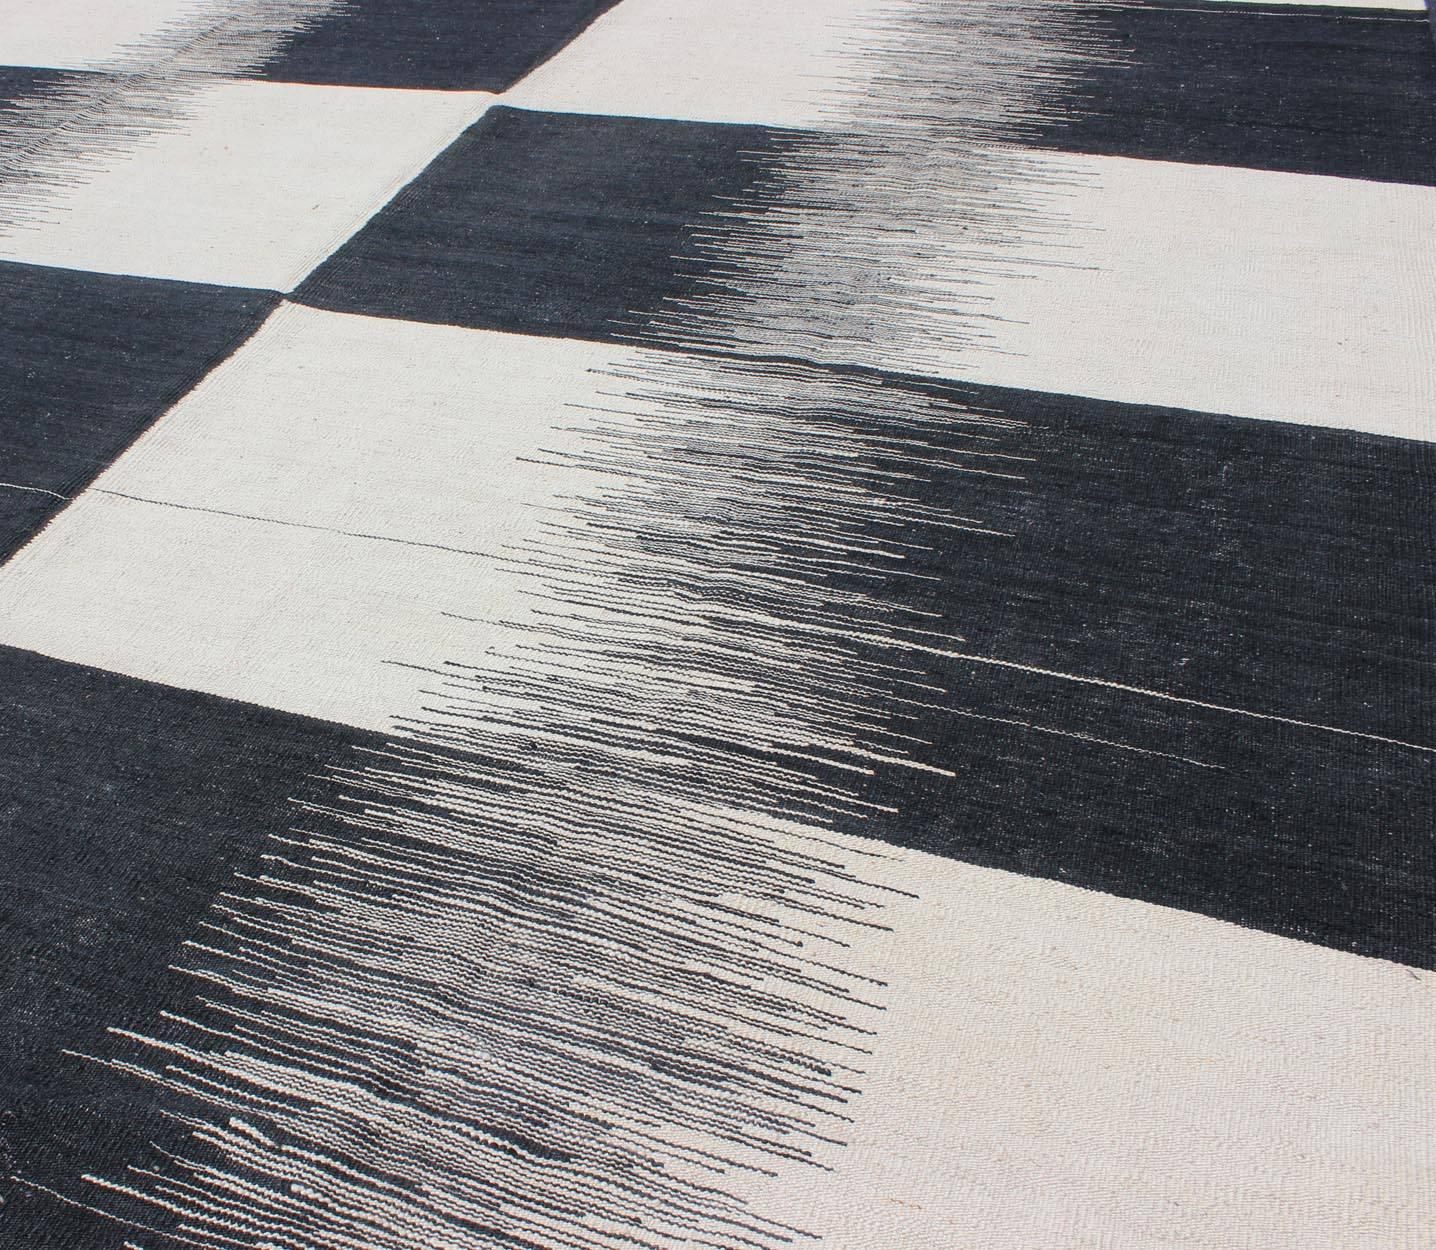 Hand-Woven Modern Kilim Rug with Black, White, and Gray Large Block and Checkerboard Design